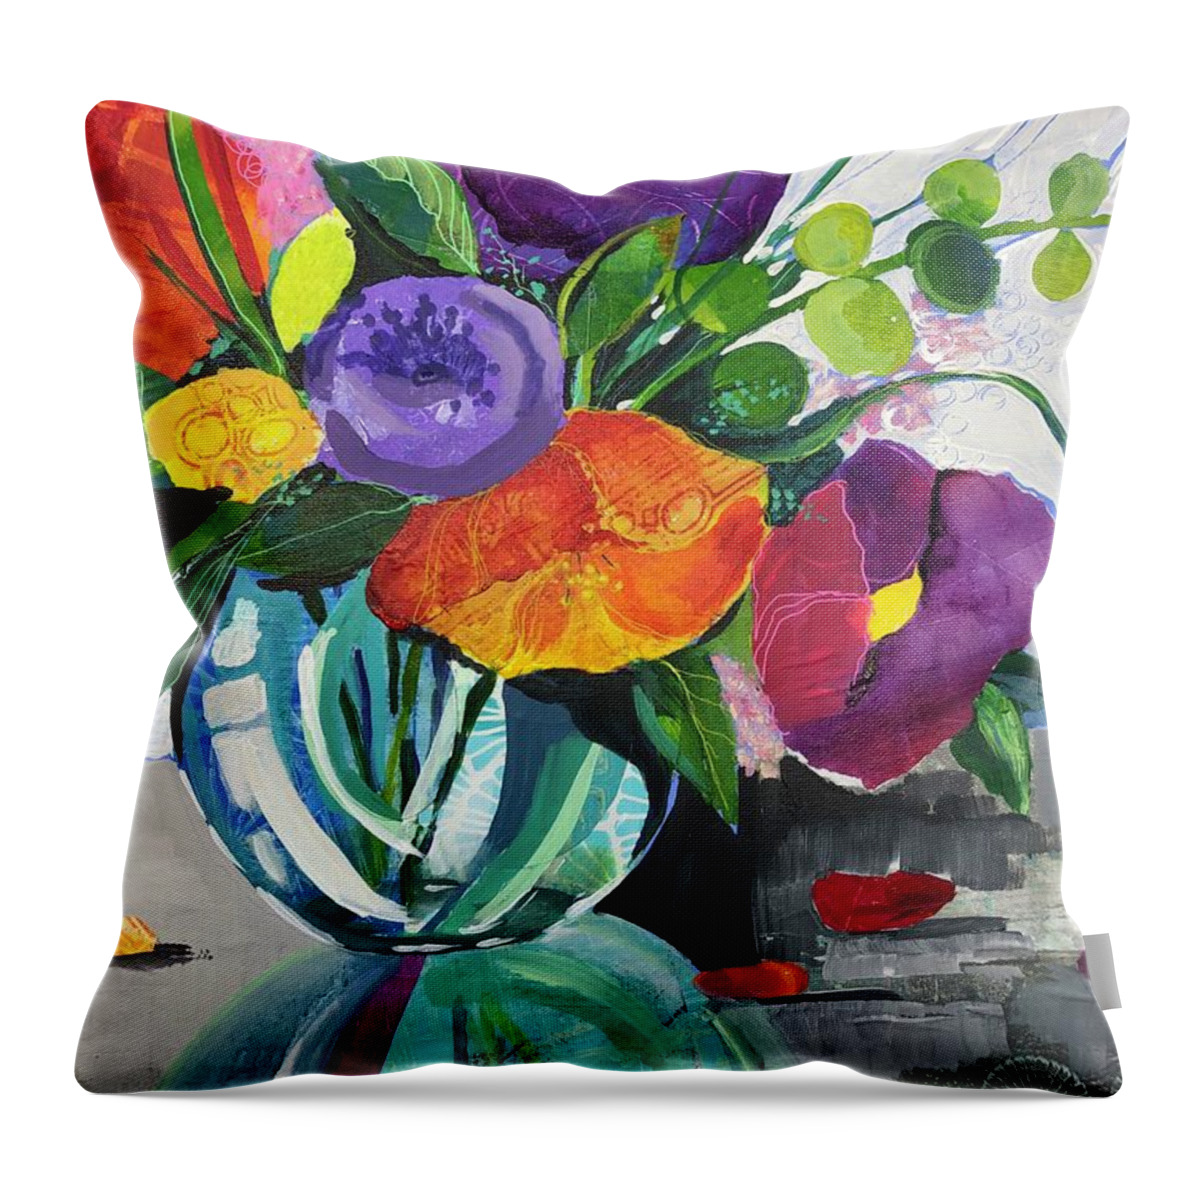  Throw Pillow featuring the mixed media Beautiful Vessel 1 by Julie Tibus